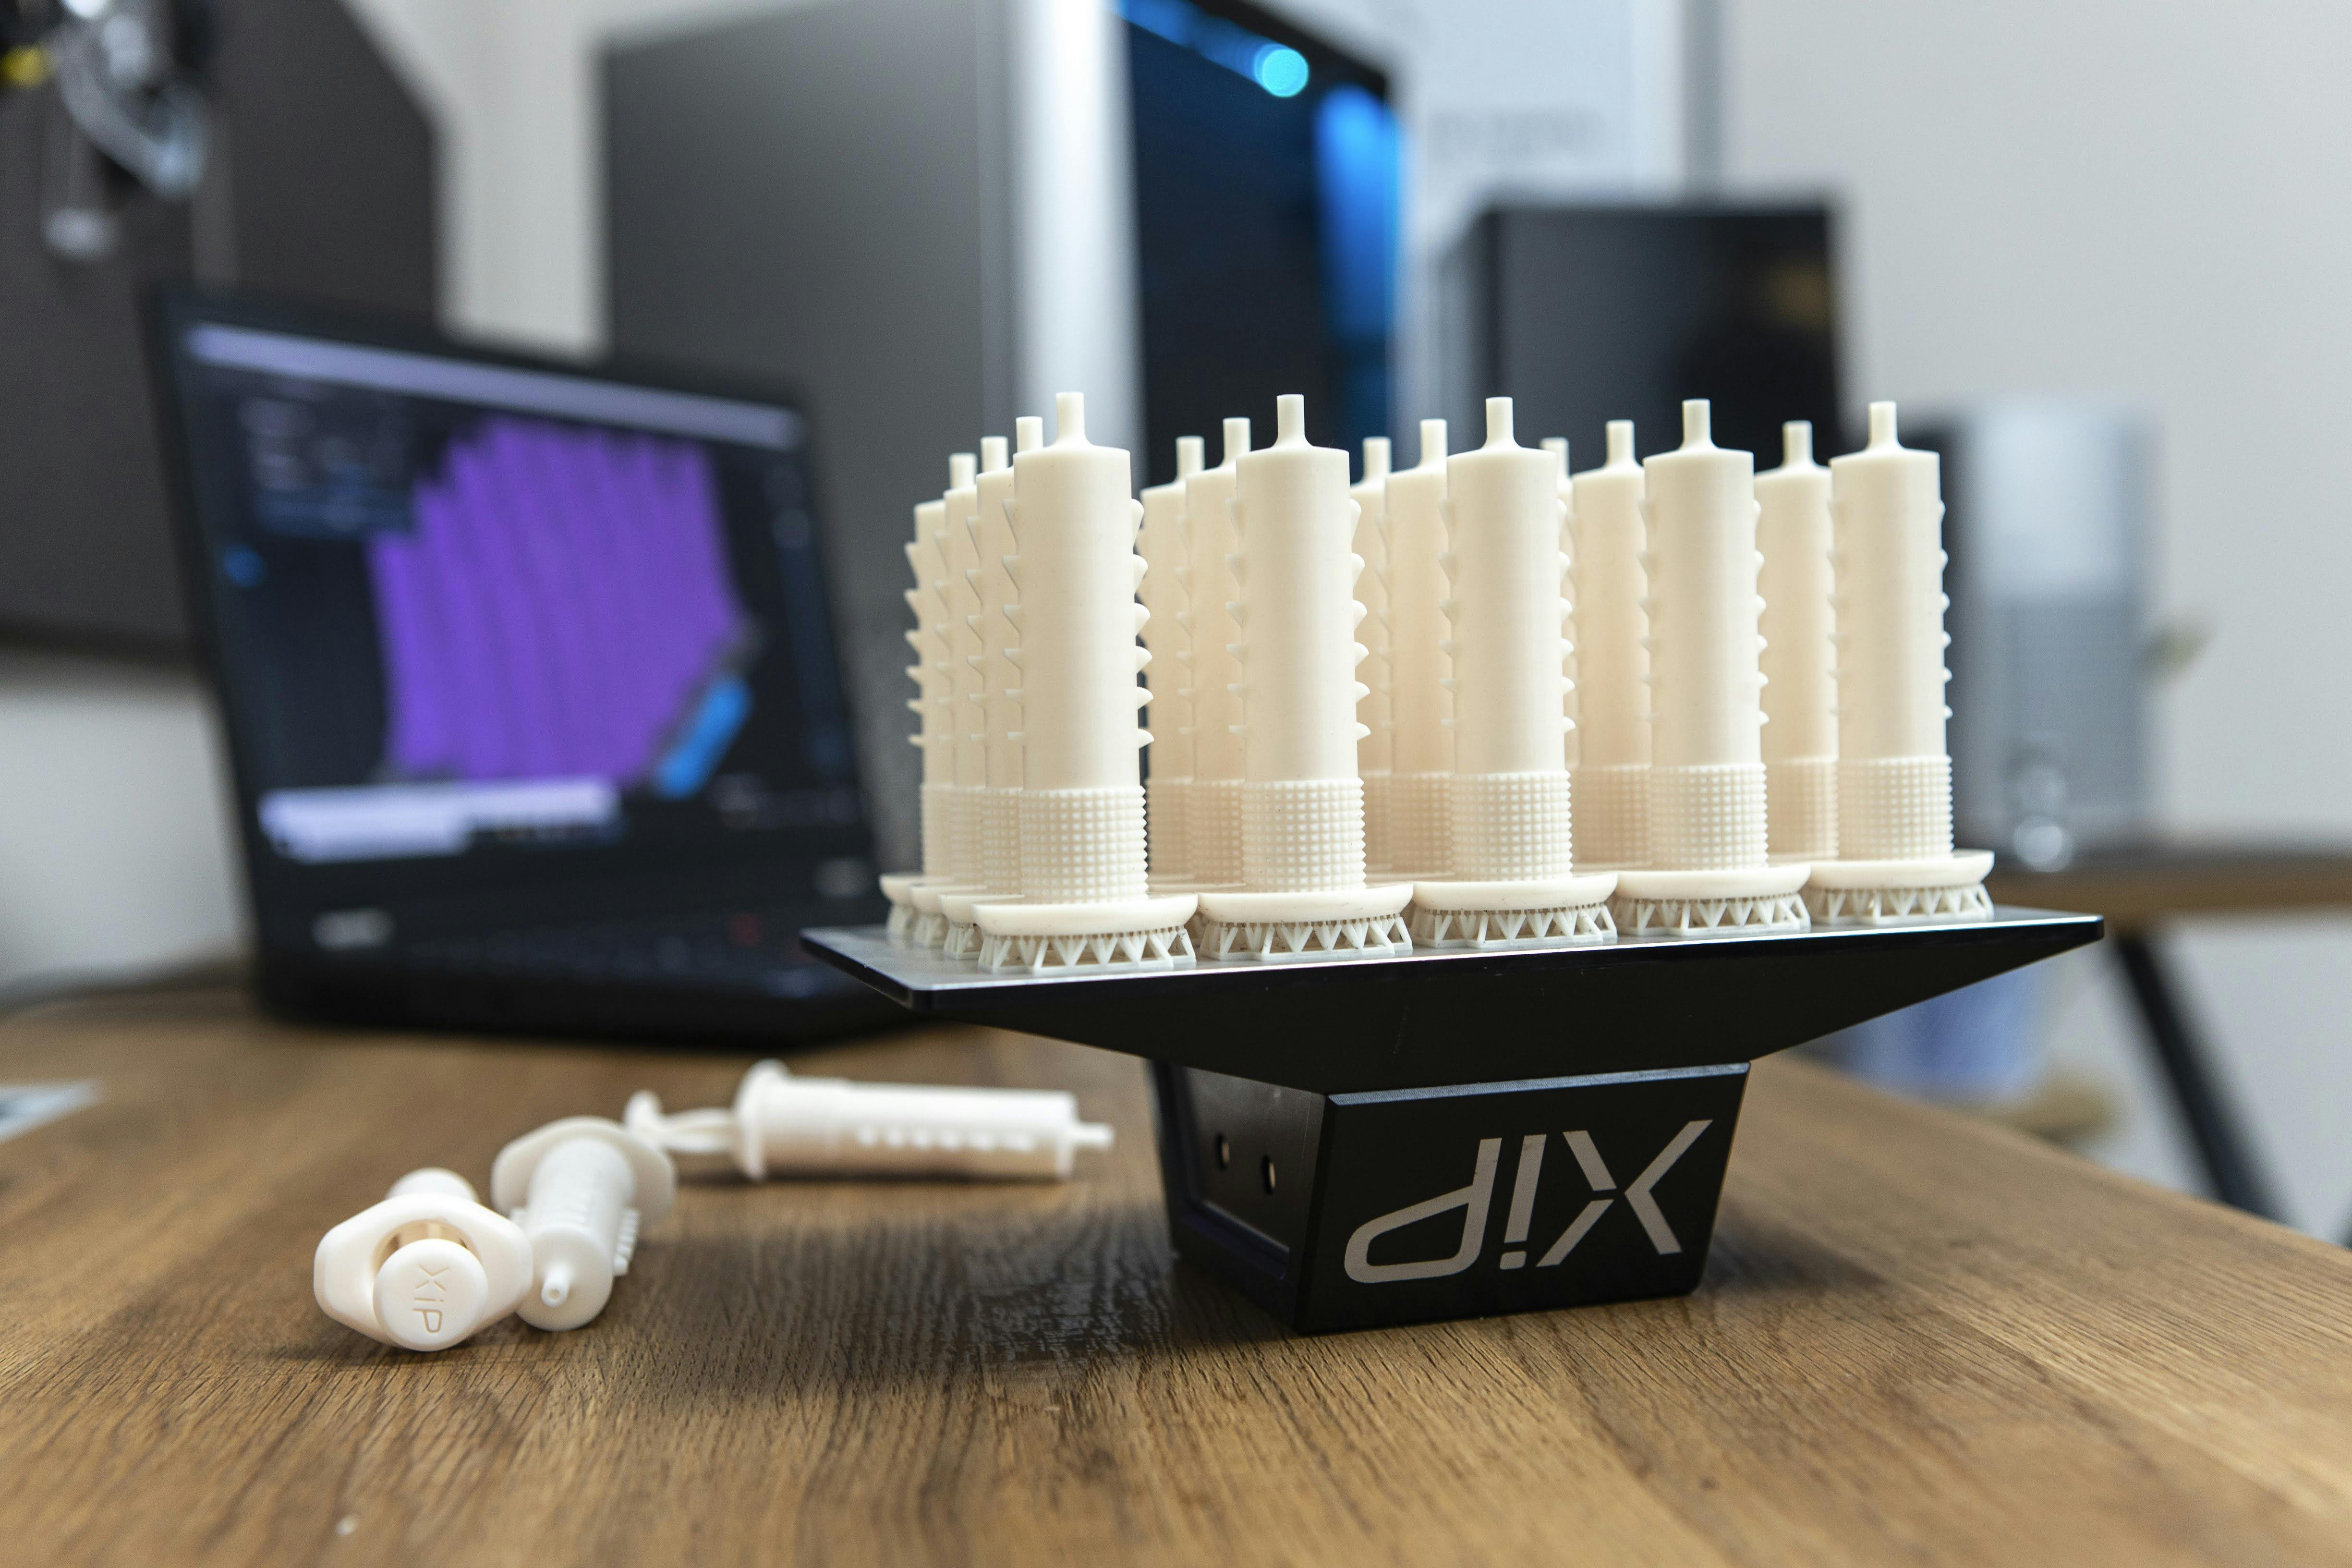 3D printed parts from the XiP